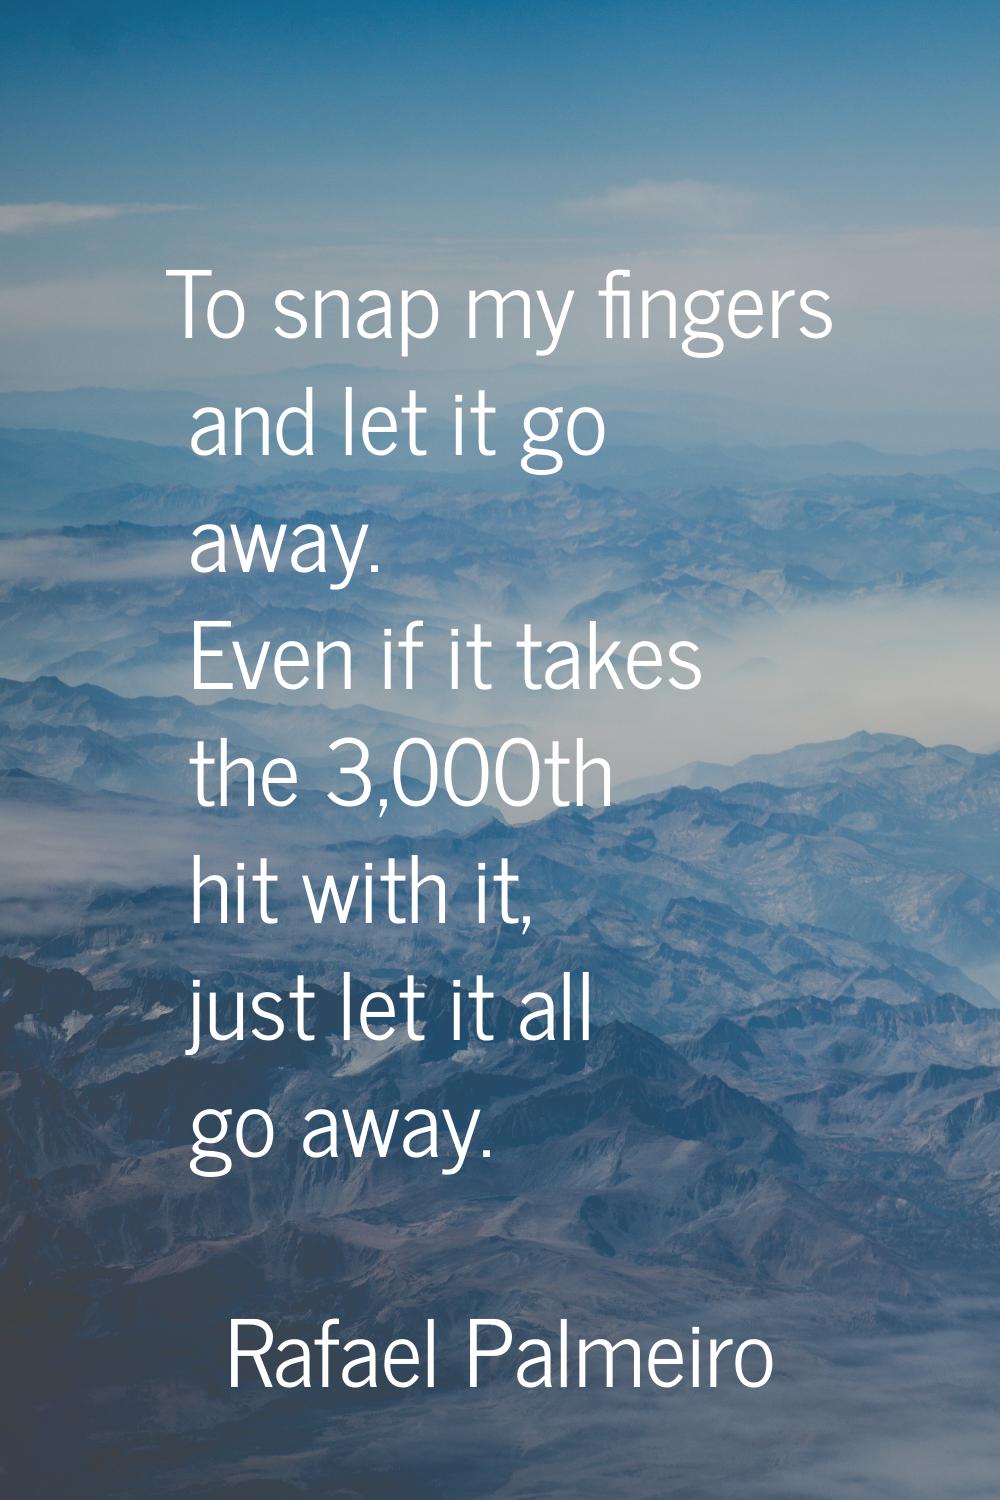 To snap my fingers and let it go away. Even if it takes the 3,000th hit with it, just let it all go